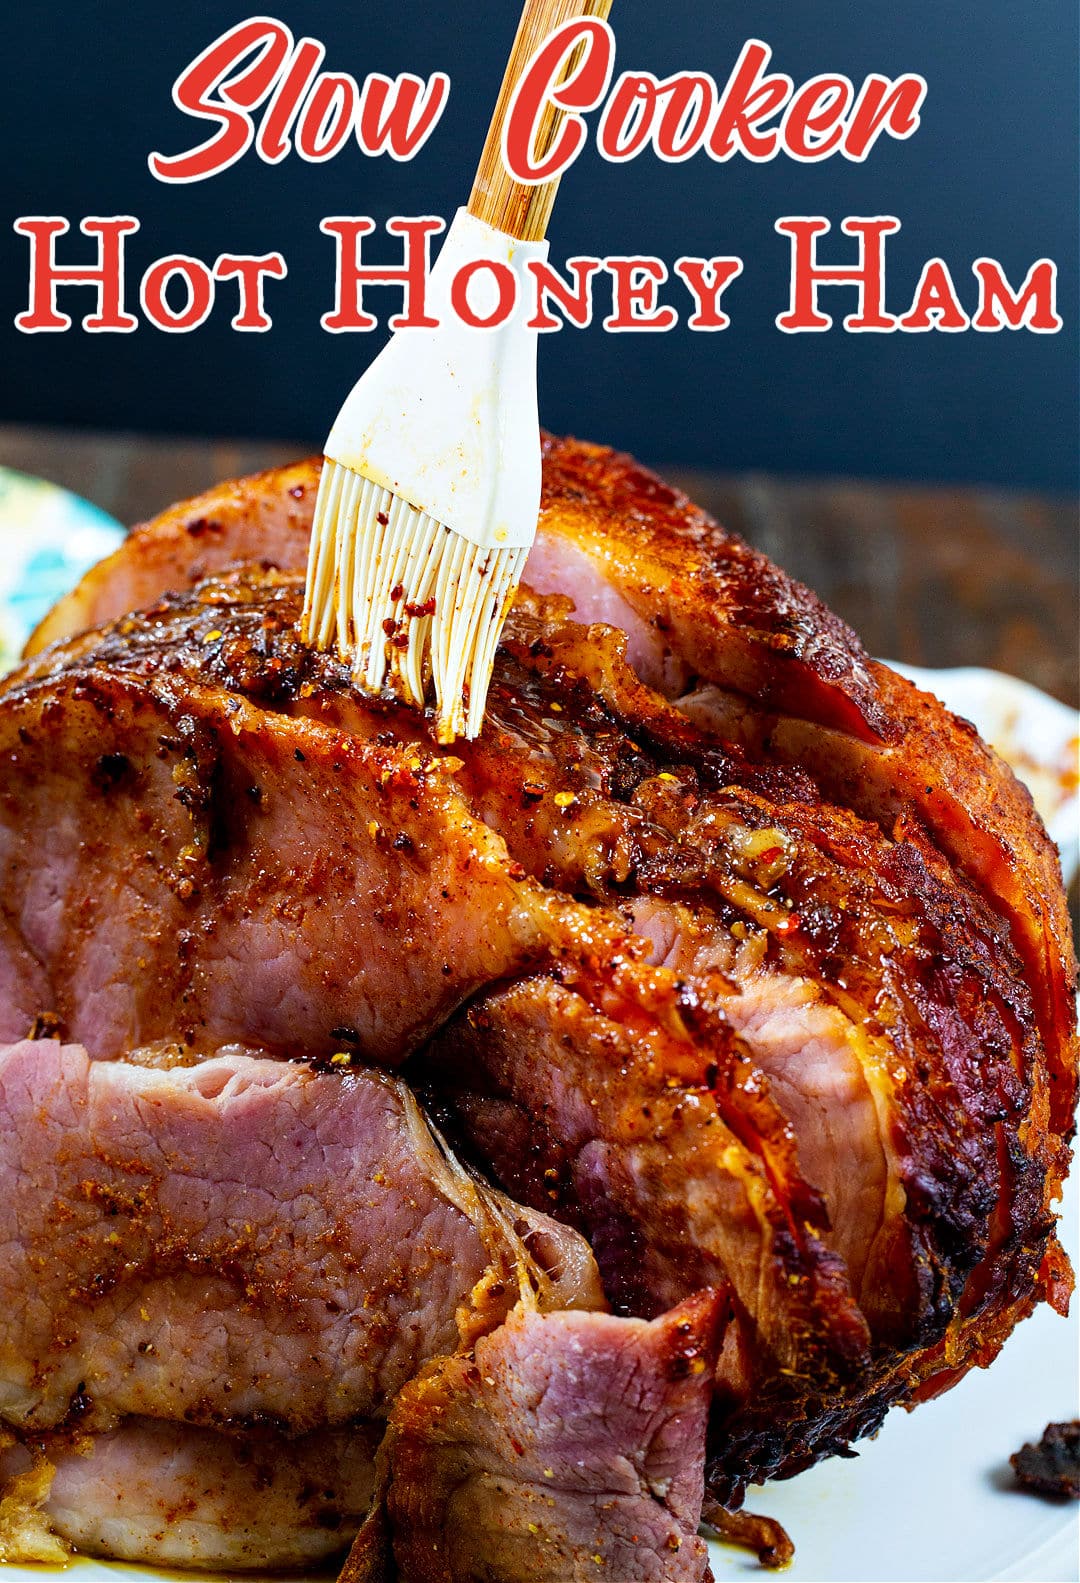 Slow Cooker Hot Honey Ham being brushed with glaze.